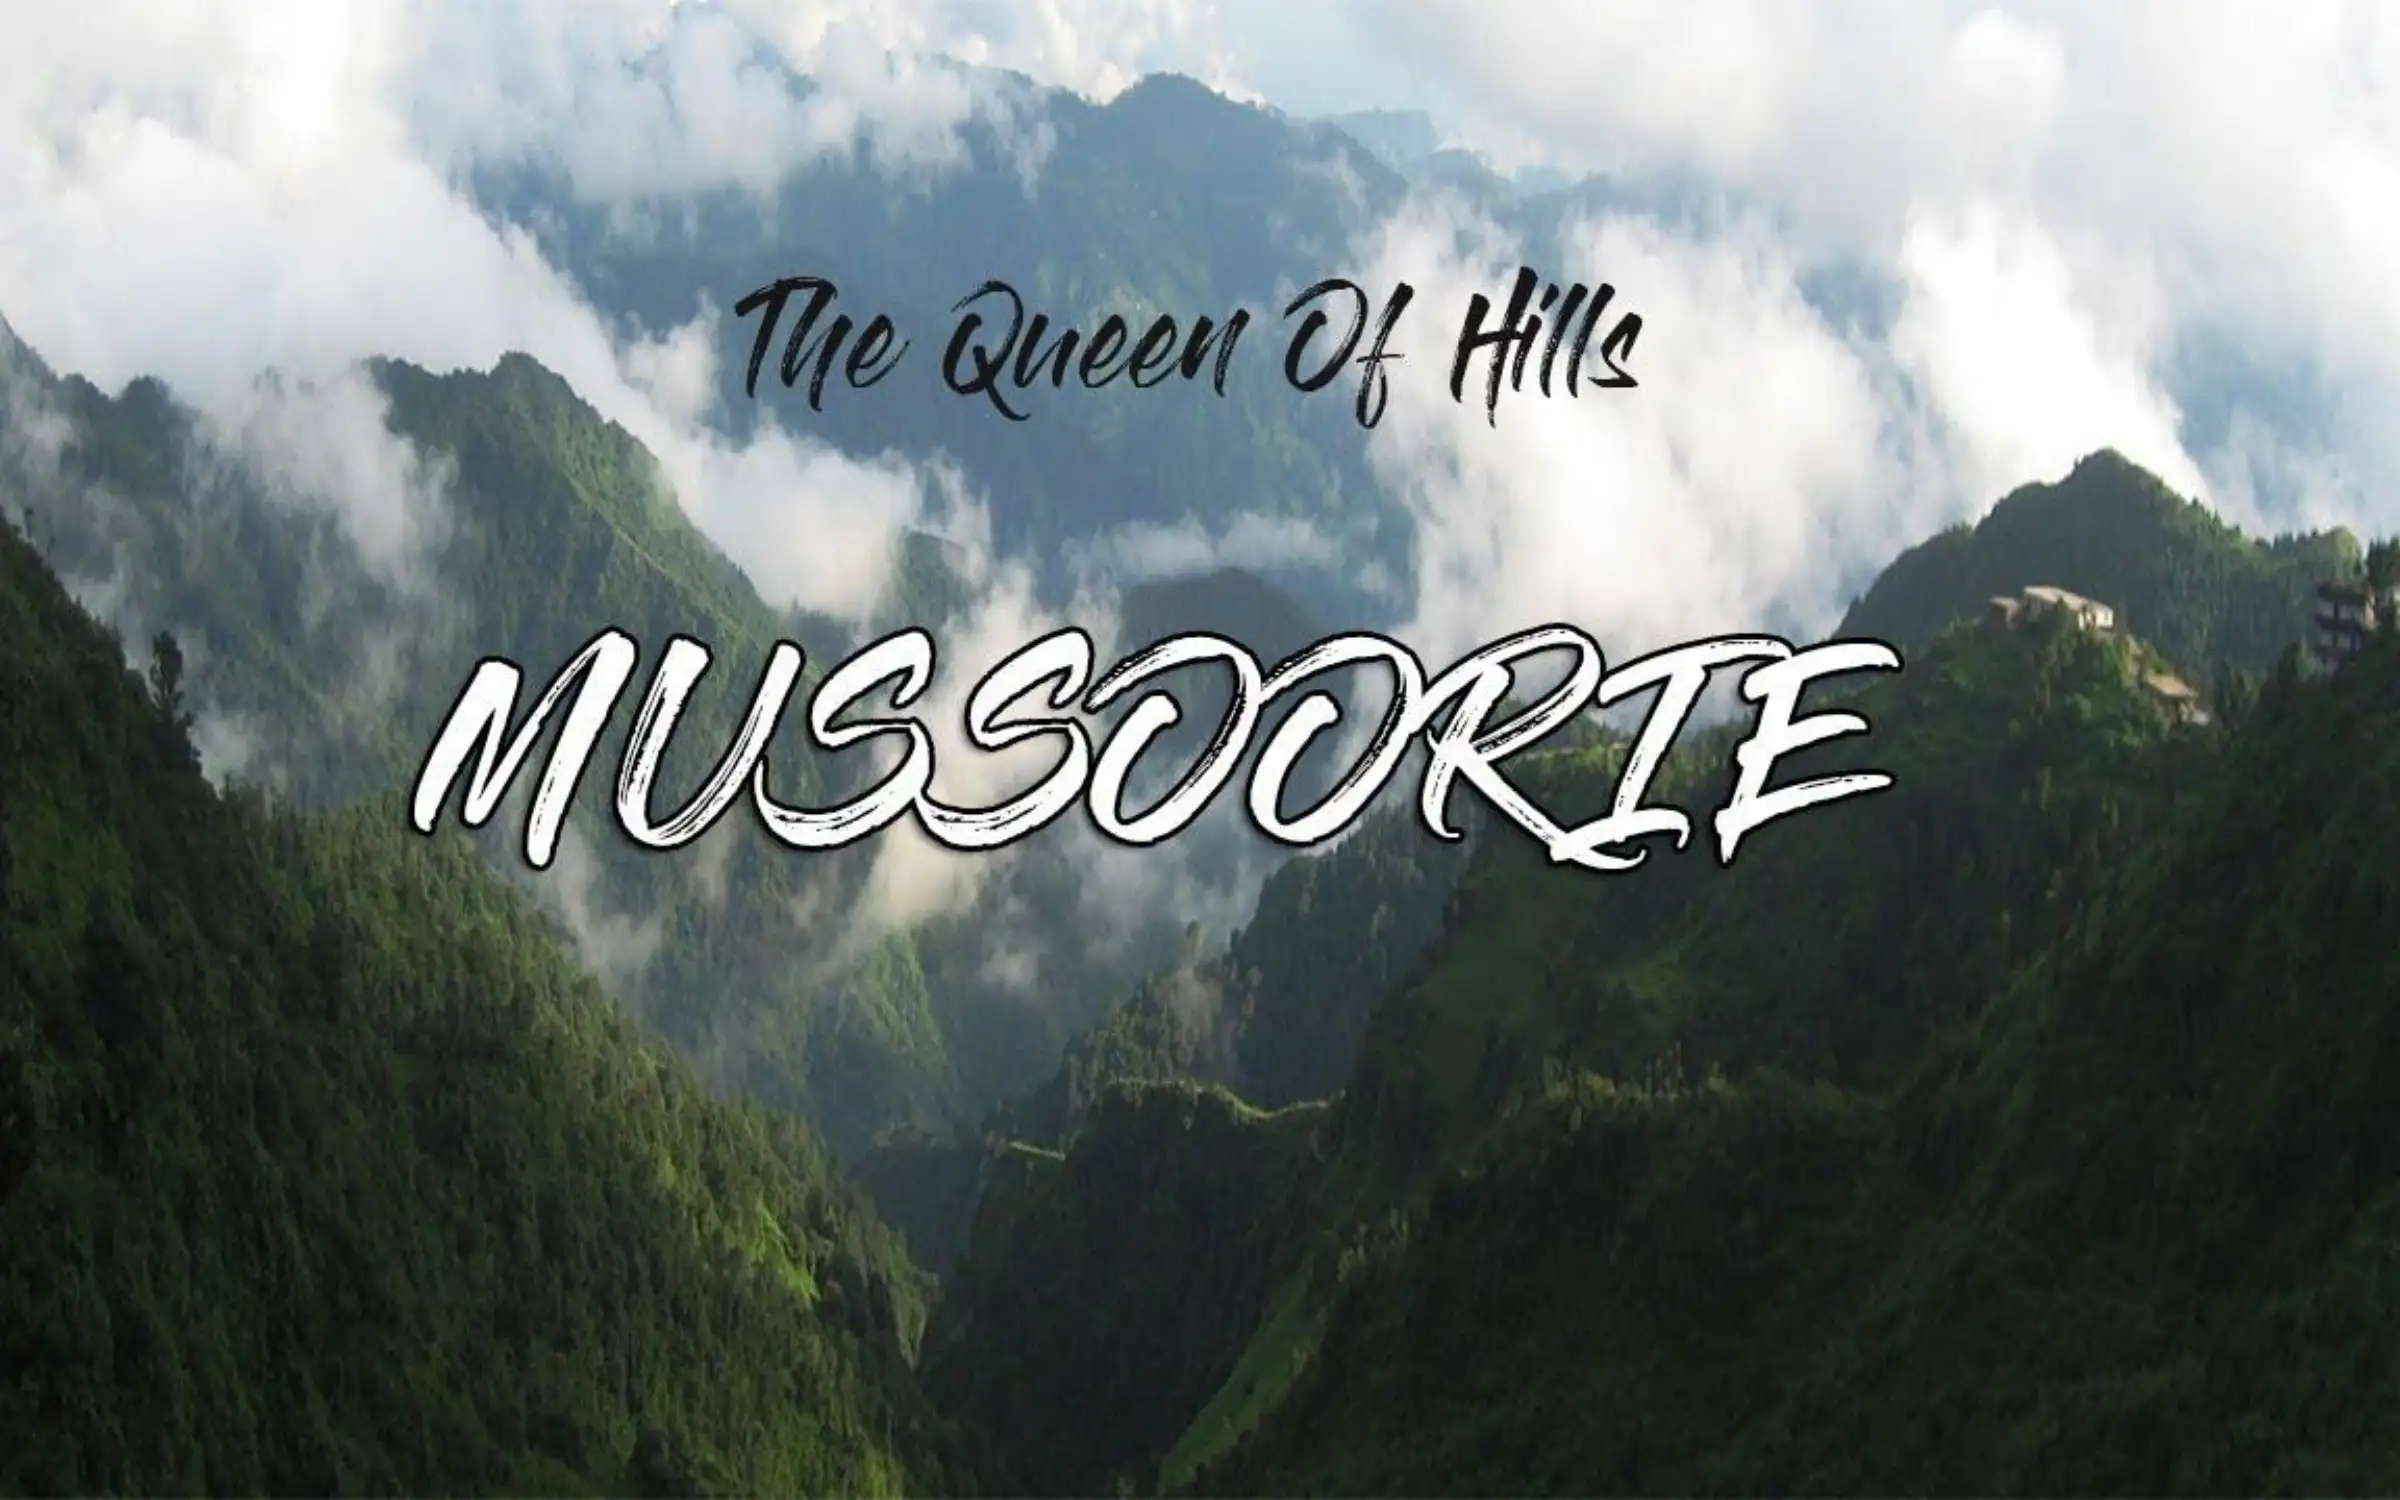 One Day Mussoorie Local Sightseeing Packages